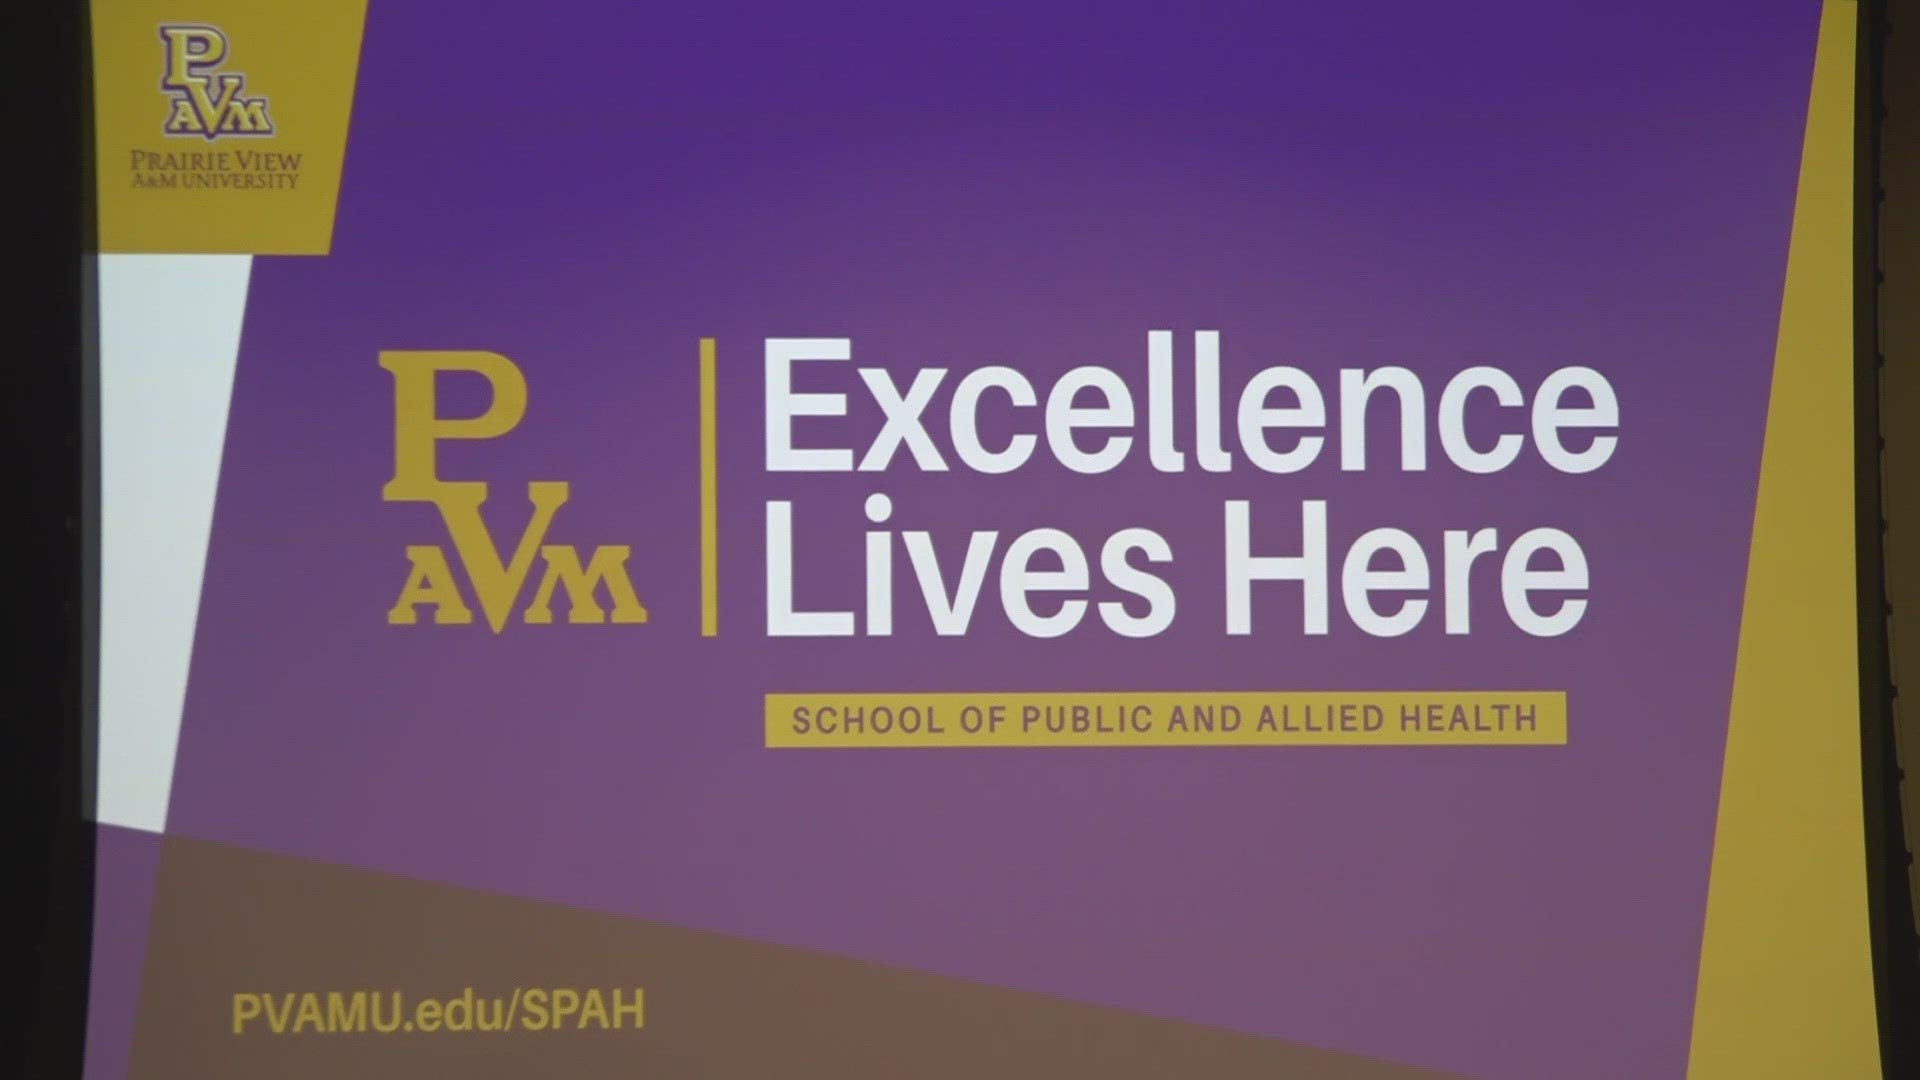 Prairie View A&M was the first historically black college and university founded in Texas.